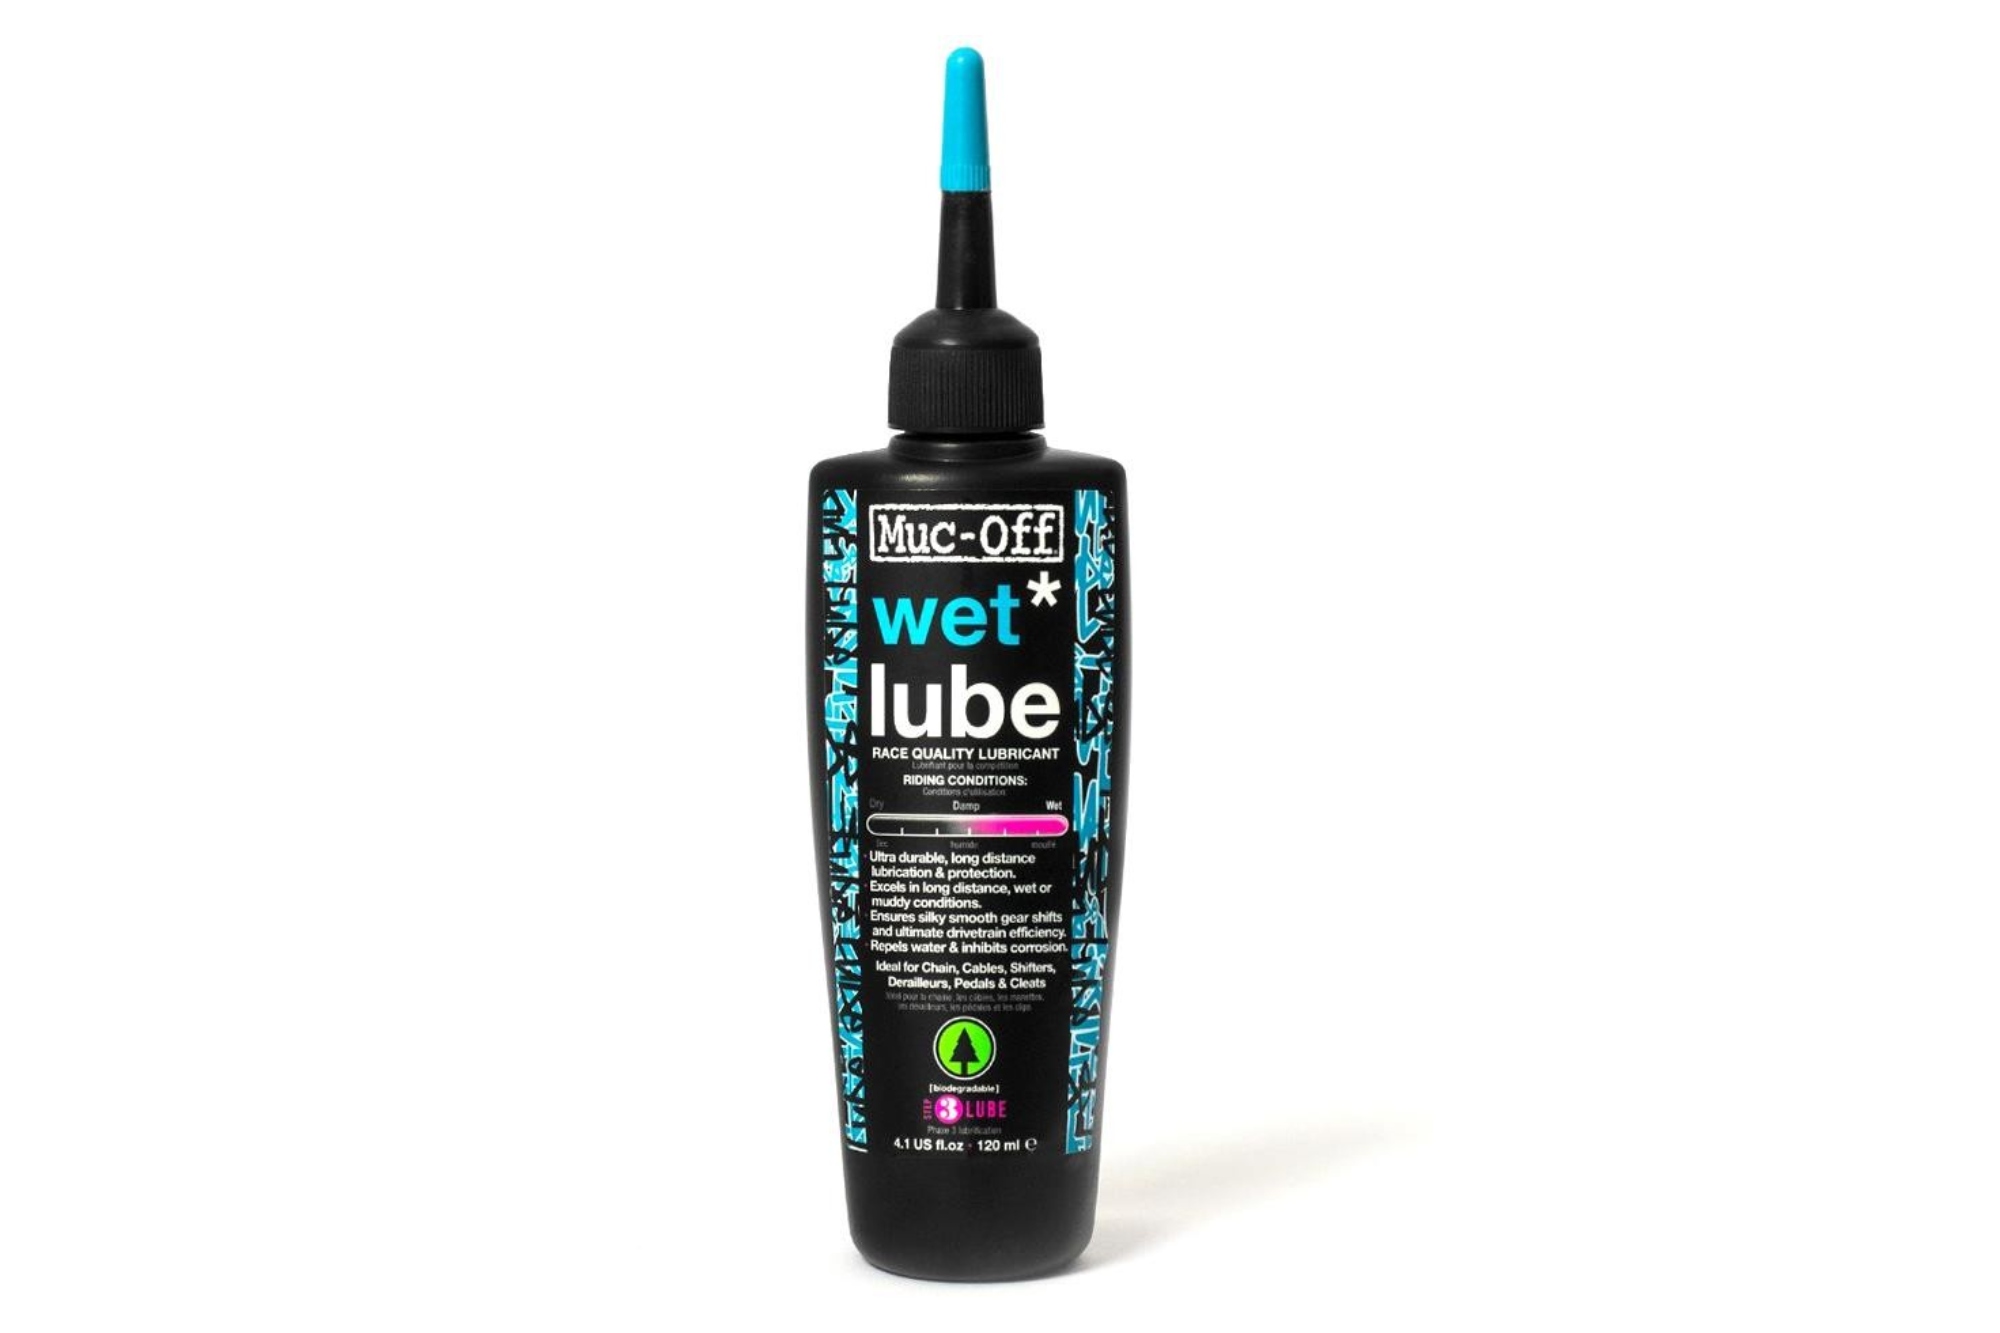 Muc-Off wet weather lube bottle